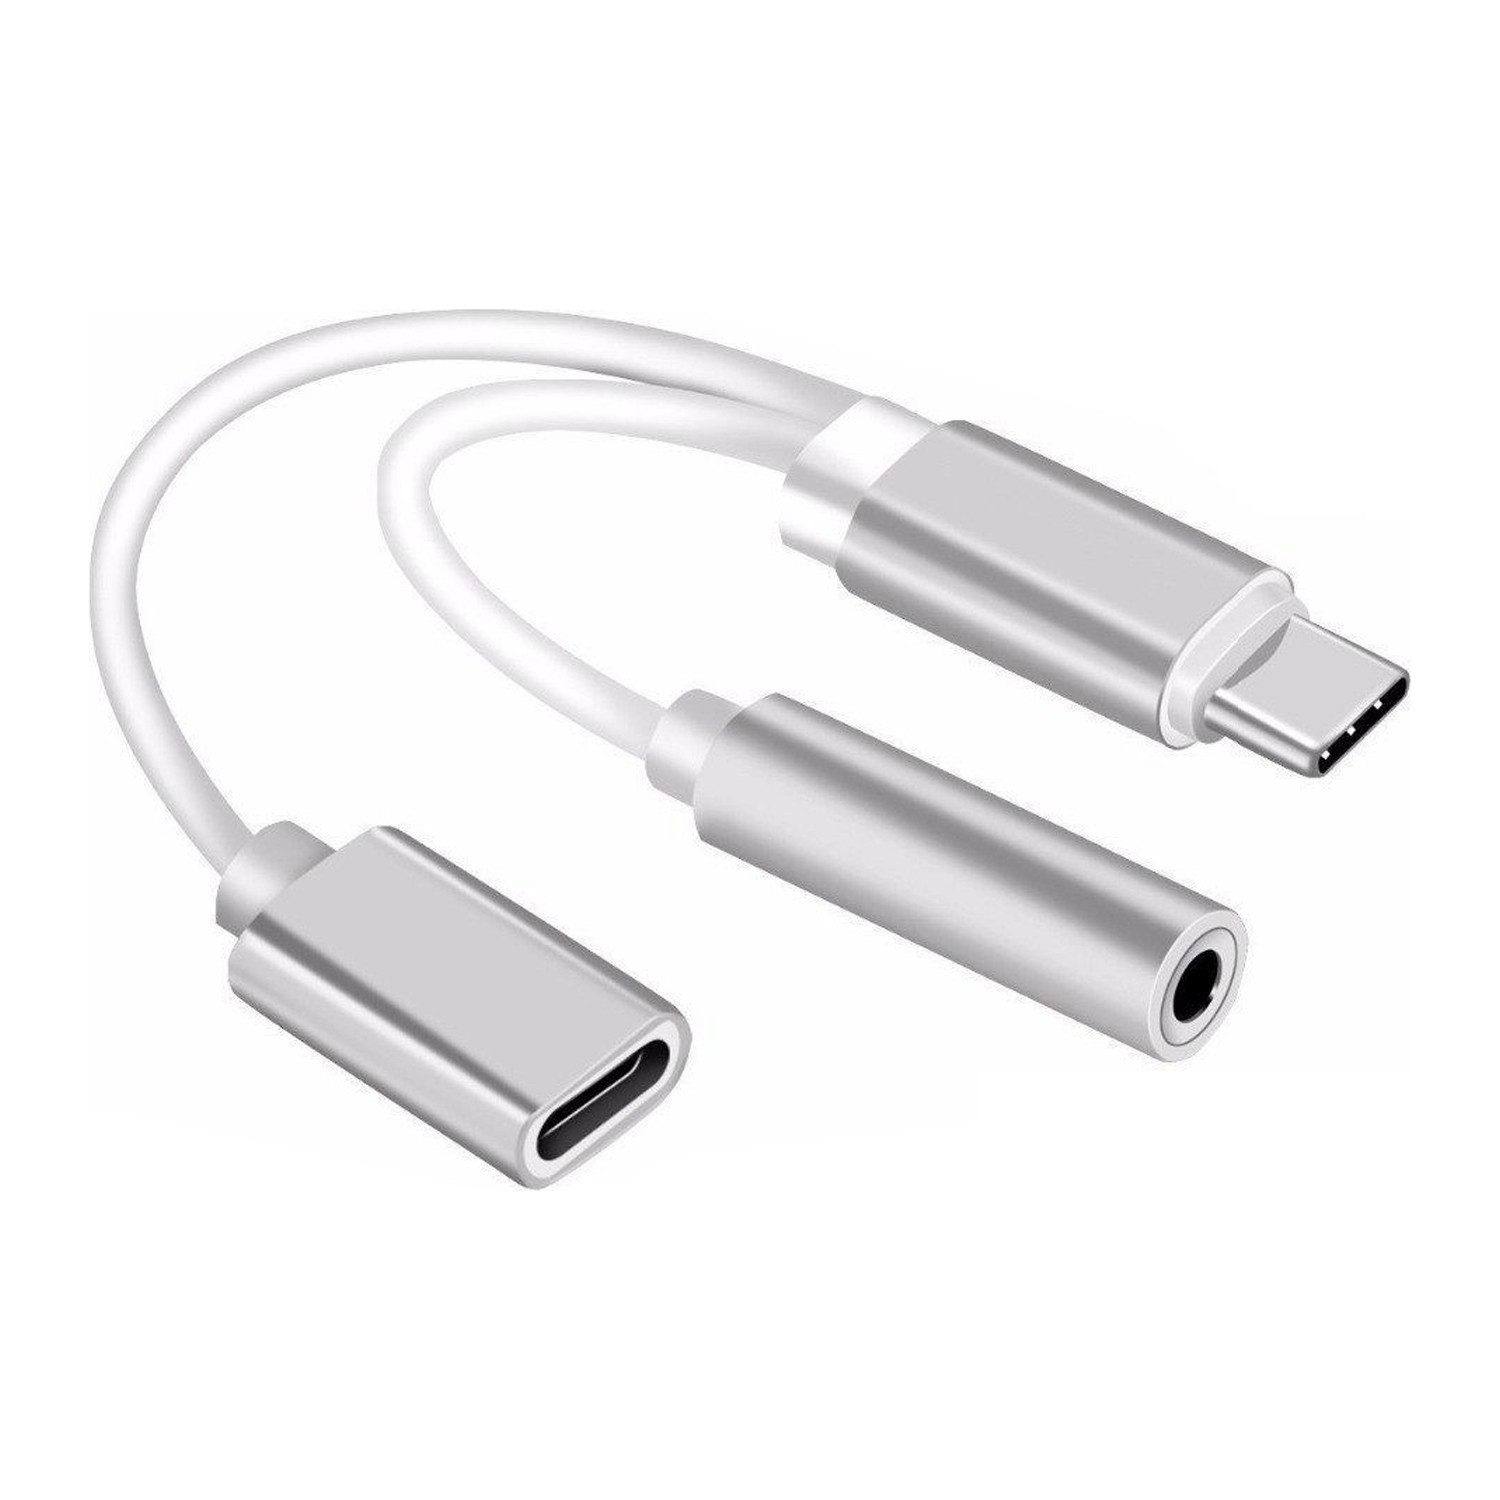 USB Type C to 3.5mm Headphone and Charger Adapter,2-in-1 USB C to